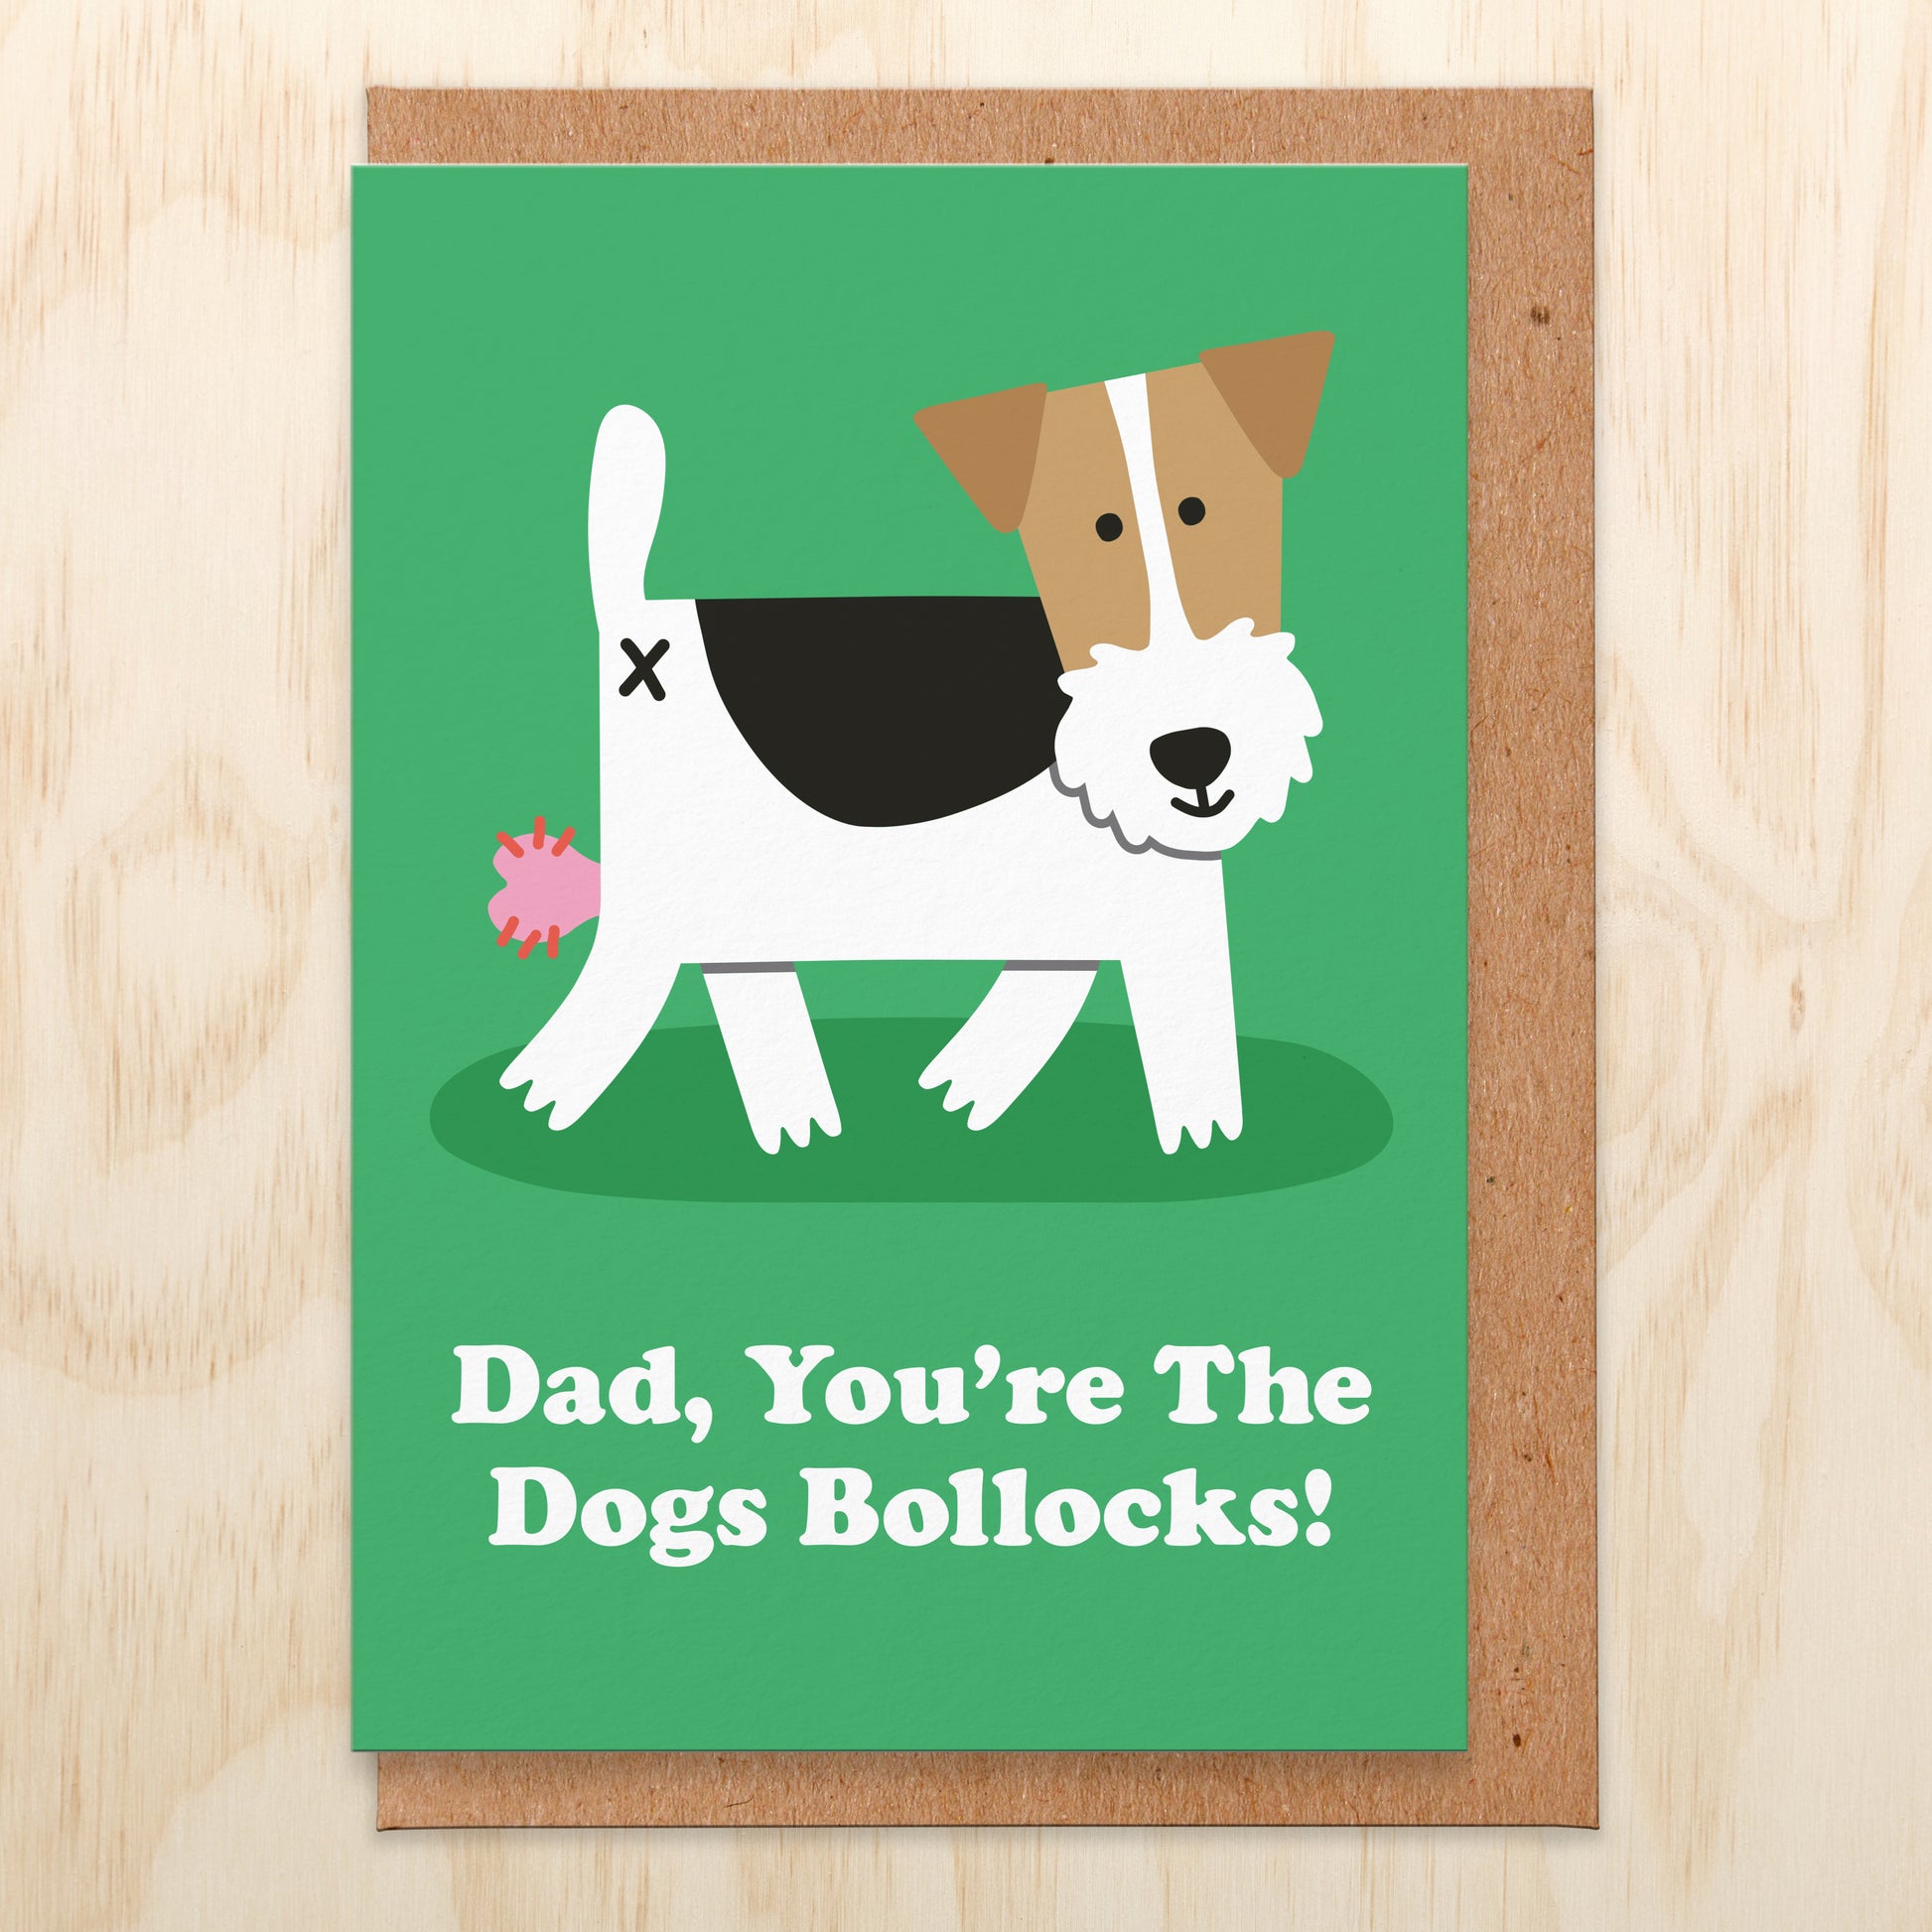 Father's Day card with an illustration of a dog with it's balls hanging out and reads Dad, You're The Dogs Bollocks!